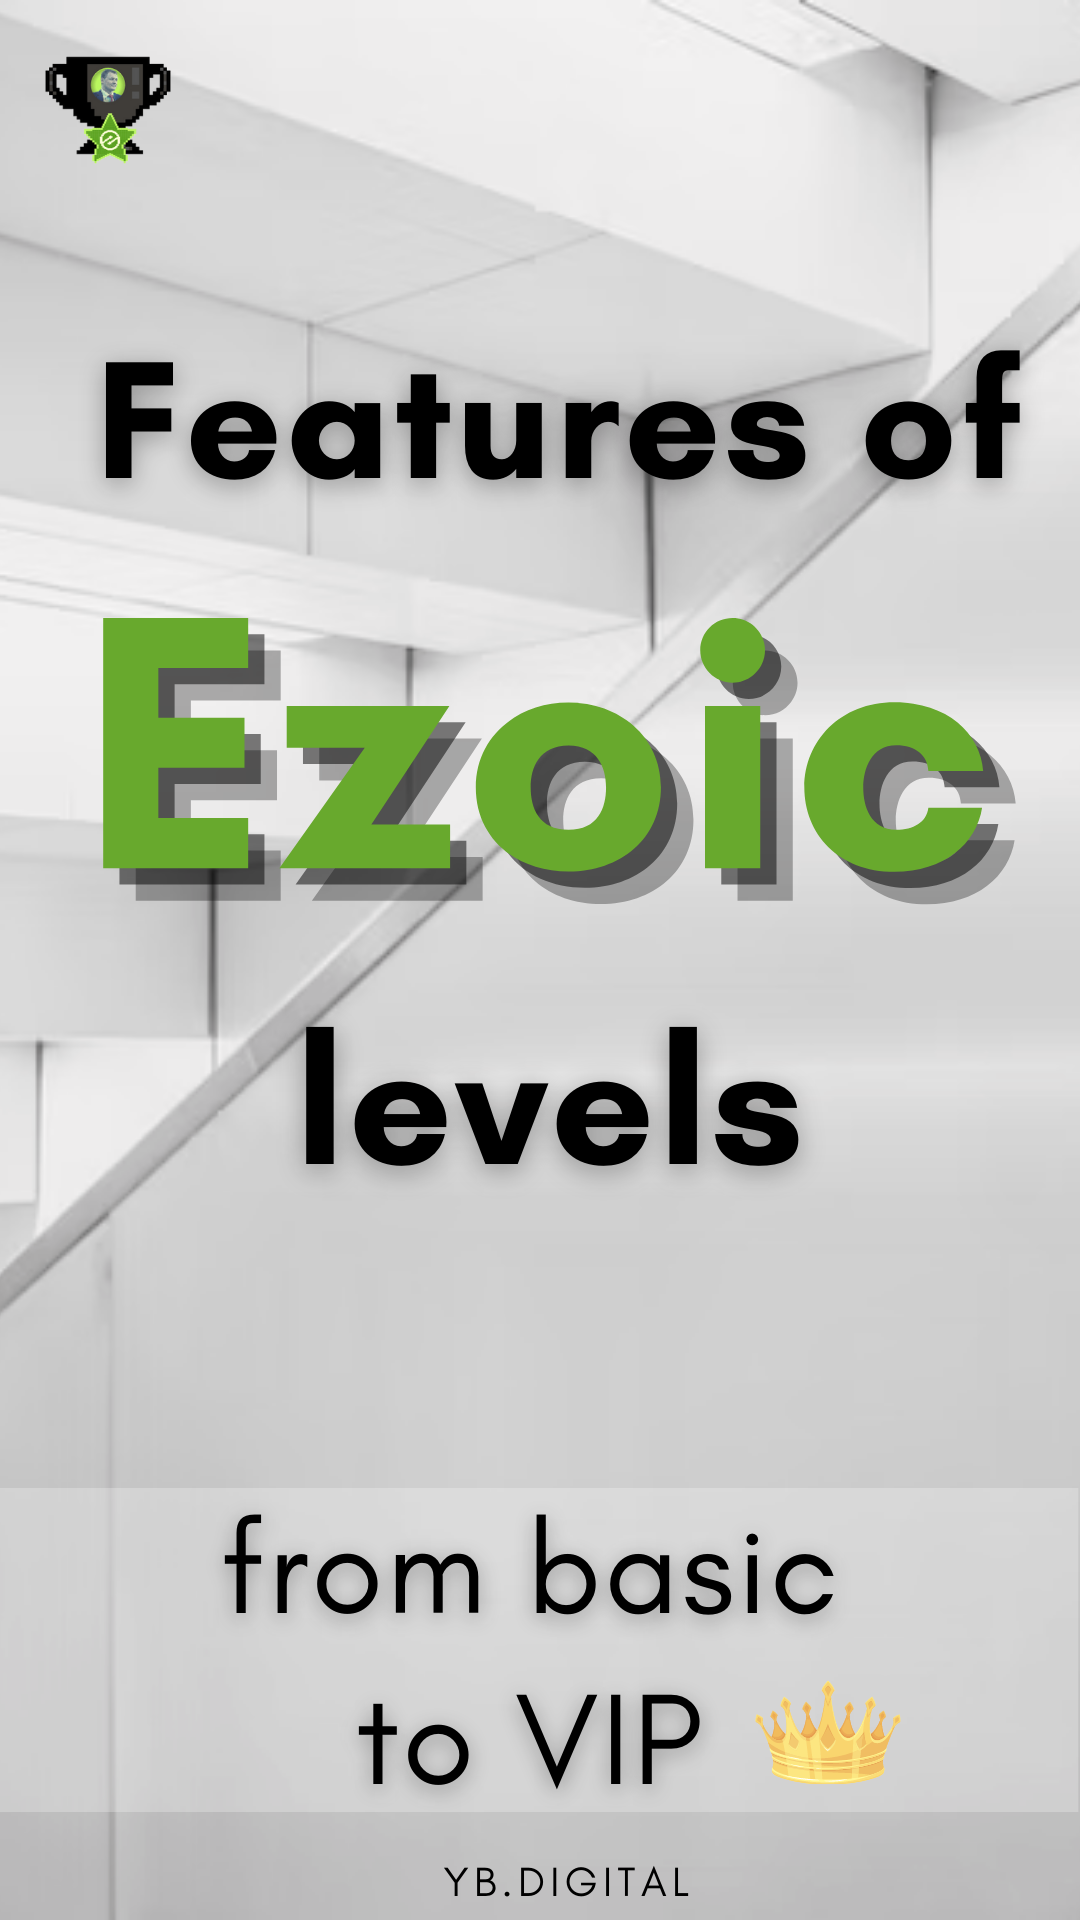 Ezoic is an ad testing platform that allows you to test ad placement and layouts for different types of ads from different ad networks on your site. Ezoic is not something complicated - everyone can easily figure it out and start earning with the platform.